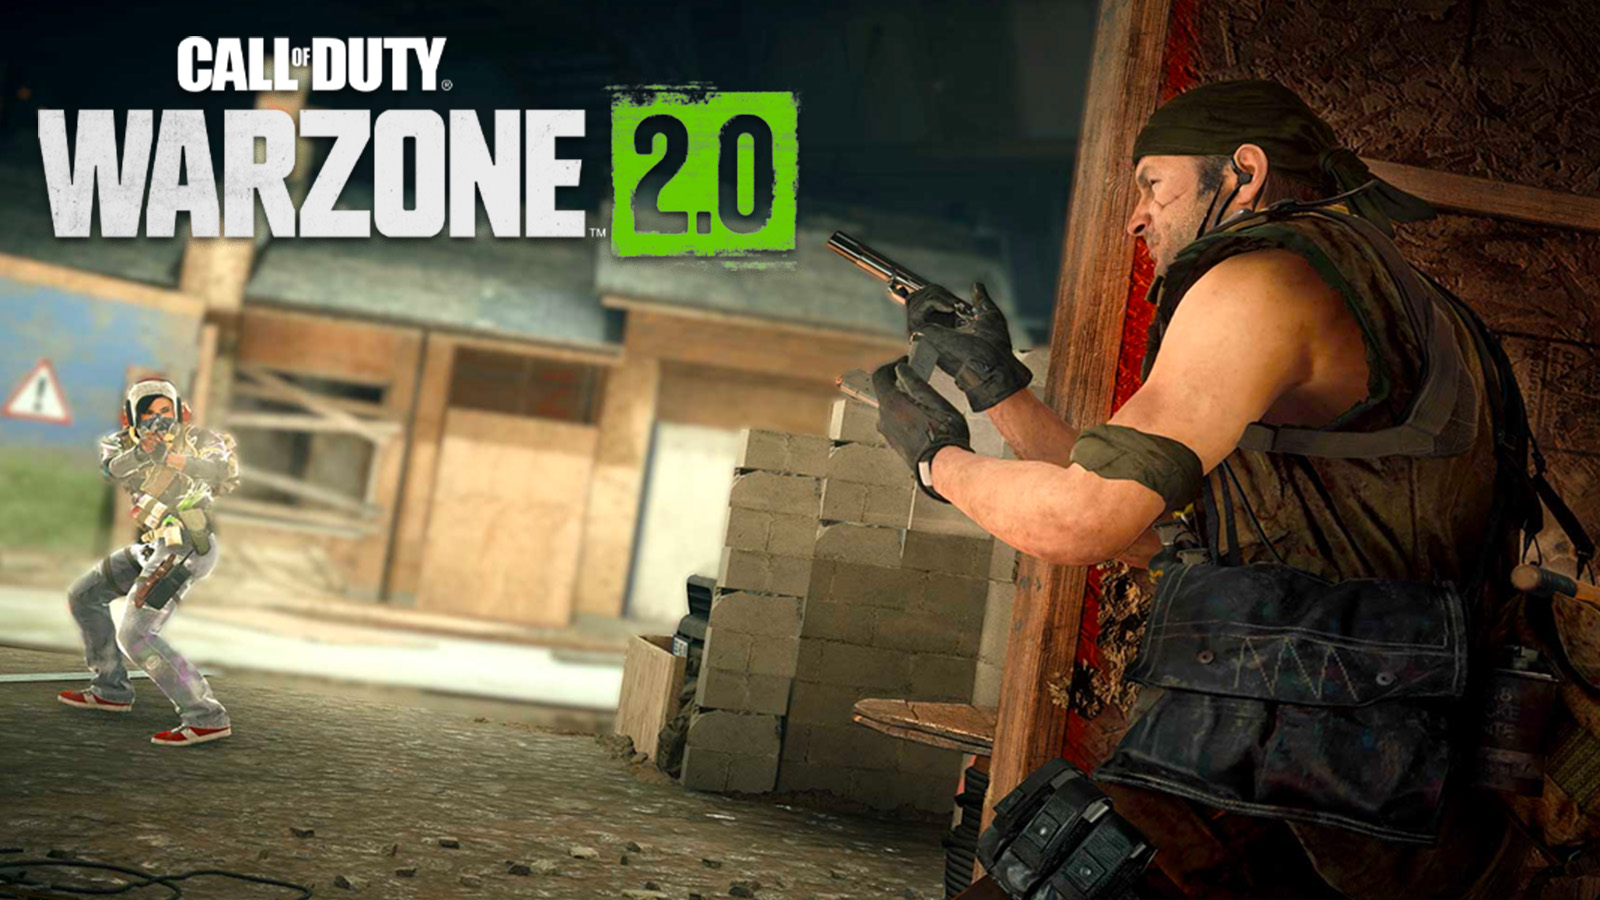 Call of Duty: Warzone 2.0 Reviews, Pros and Cons